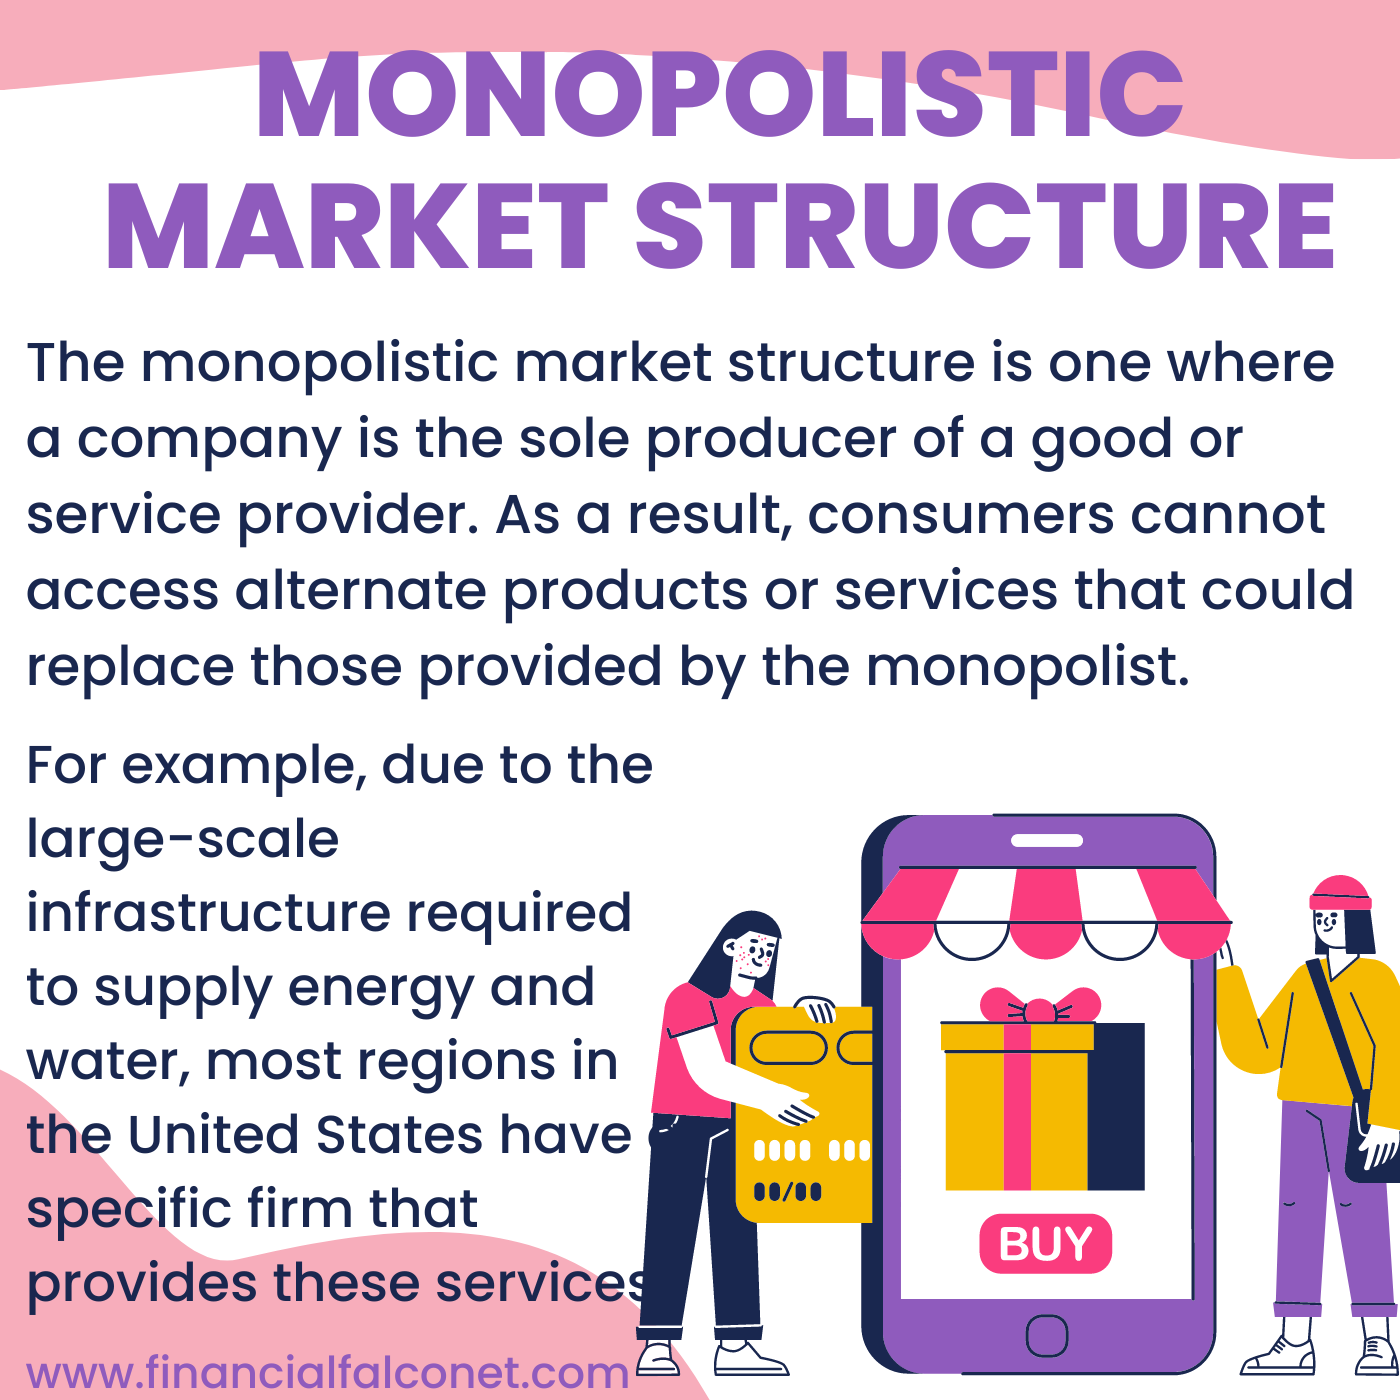 Monopolistic market structure definition and example